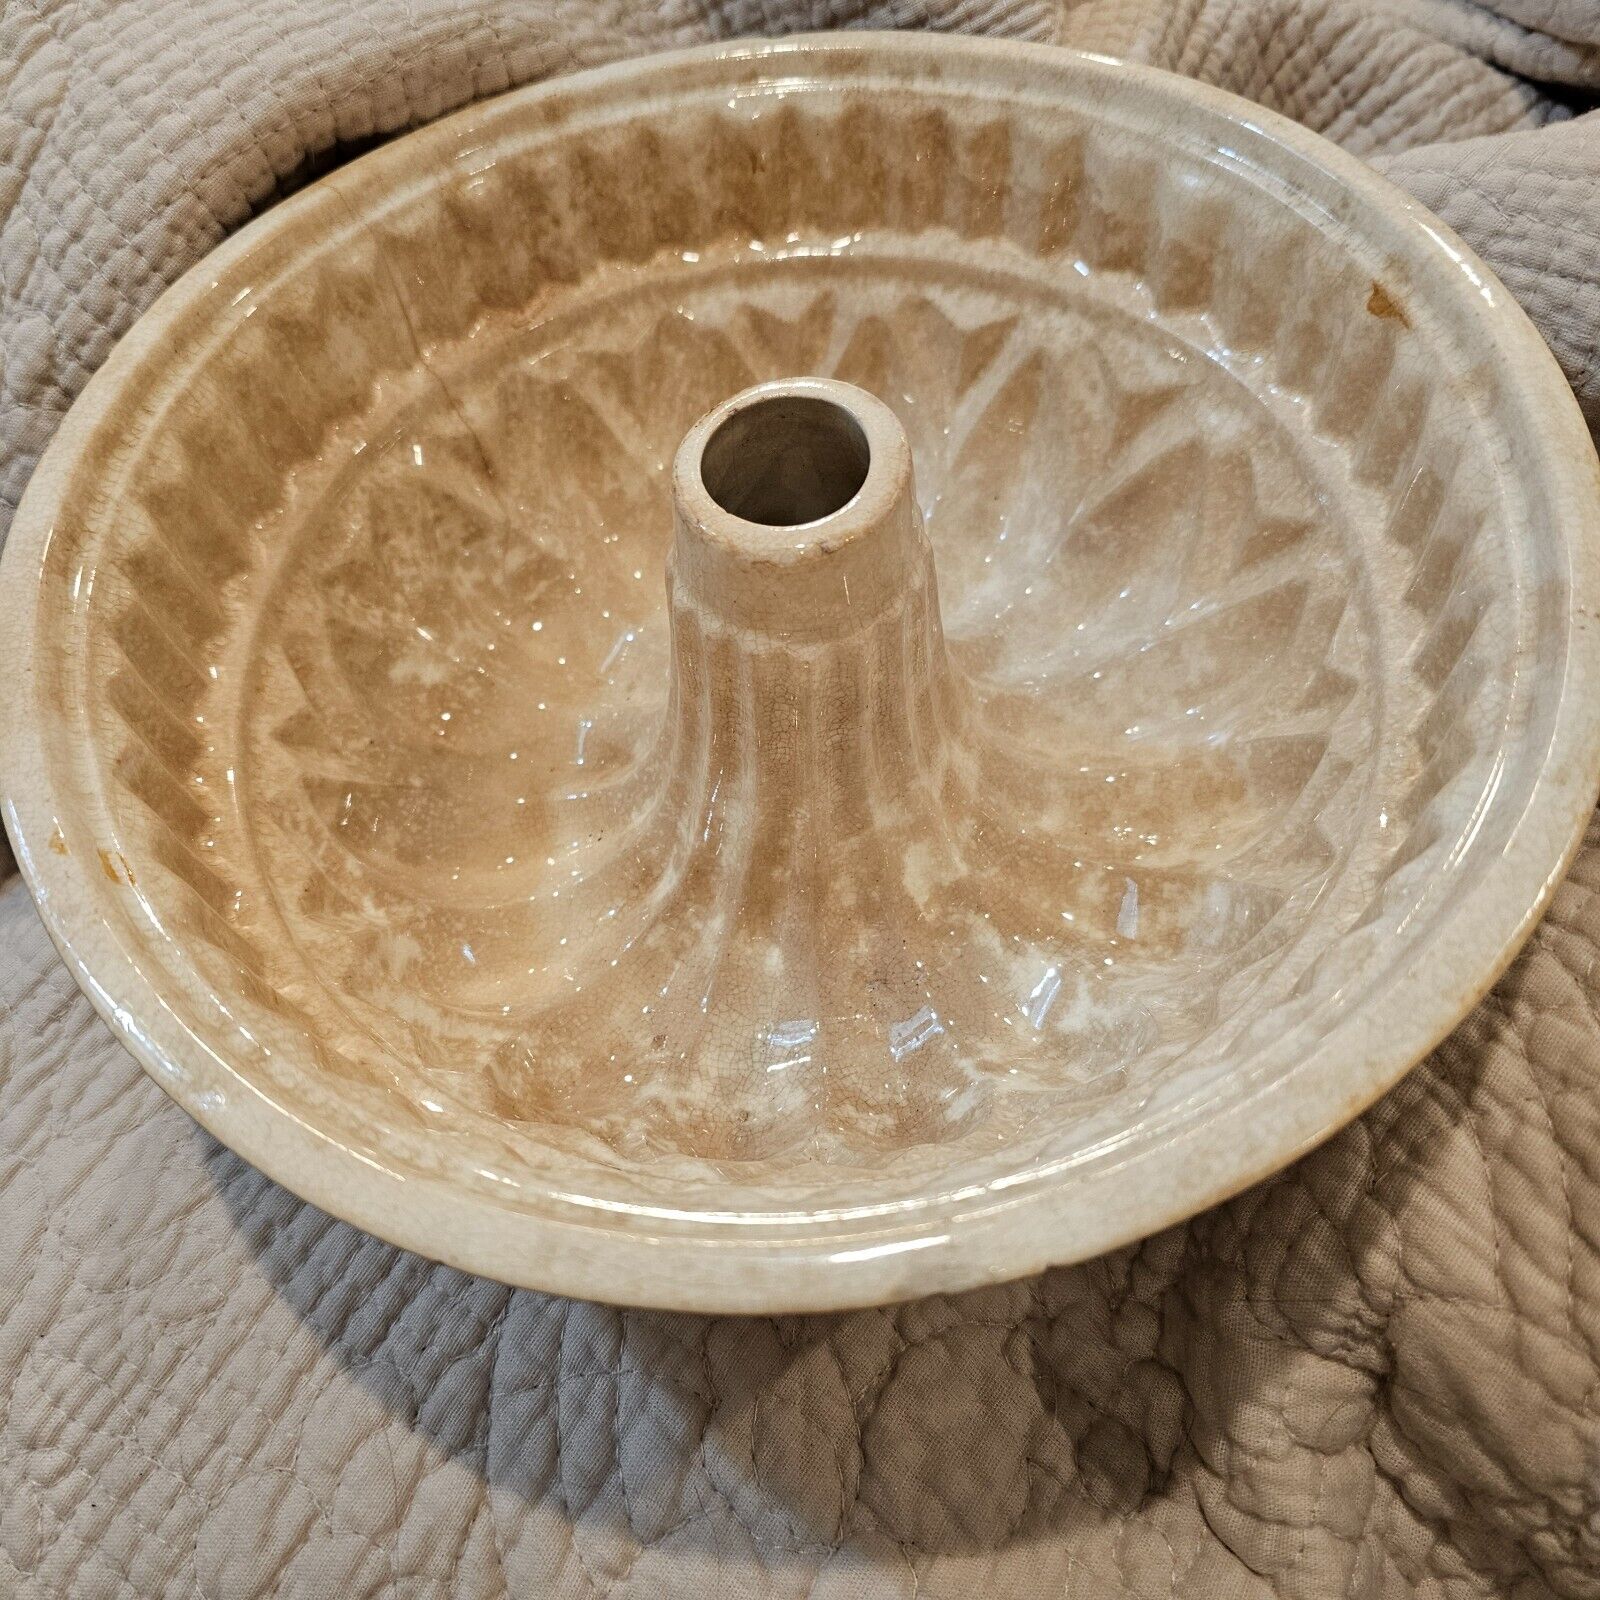 Ironstone ? stained and crazed bundt cake pan